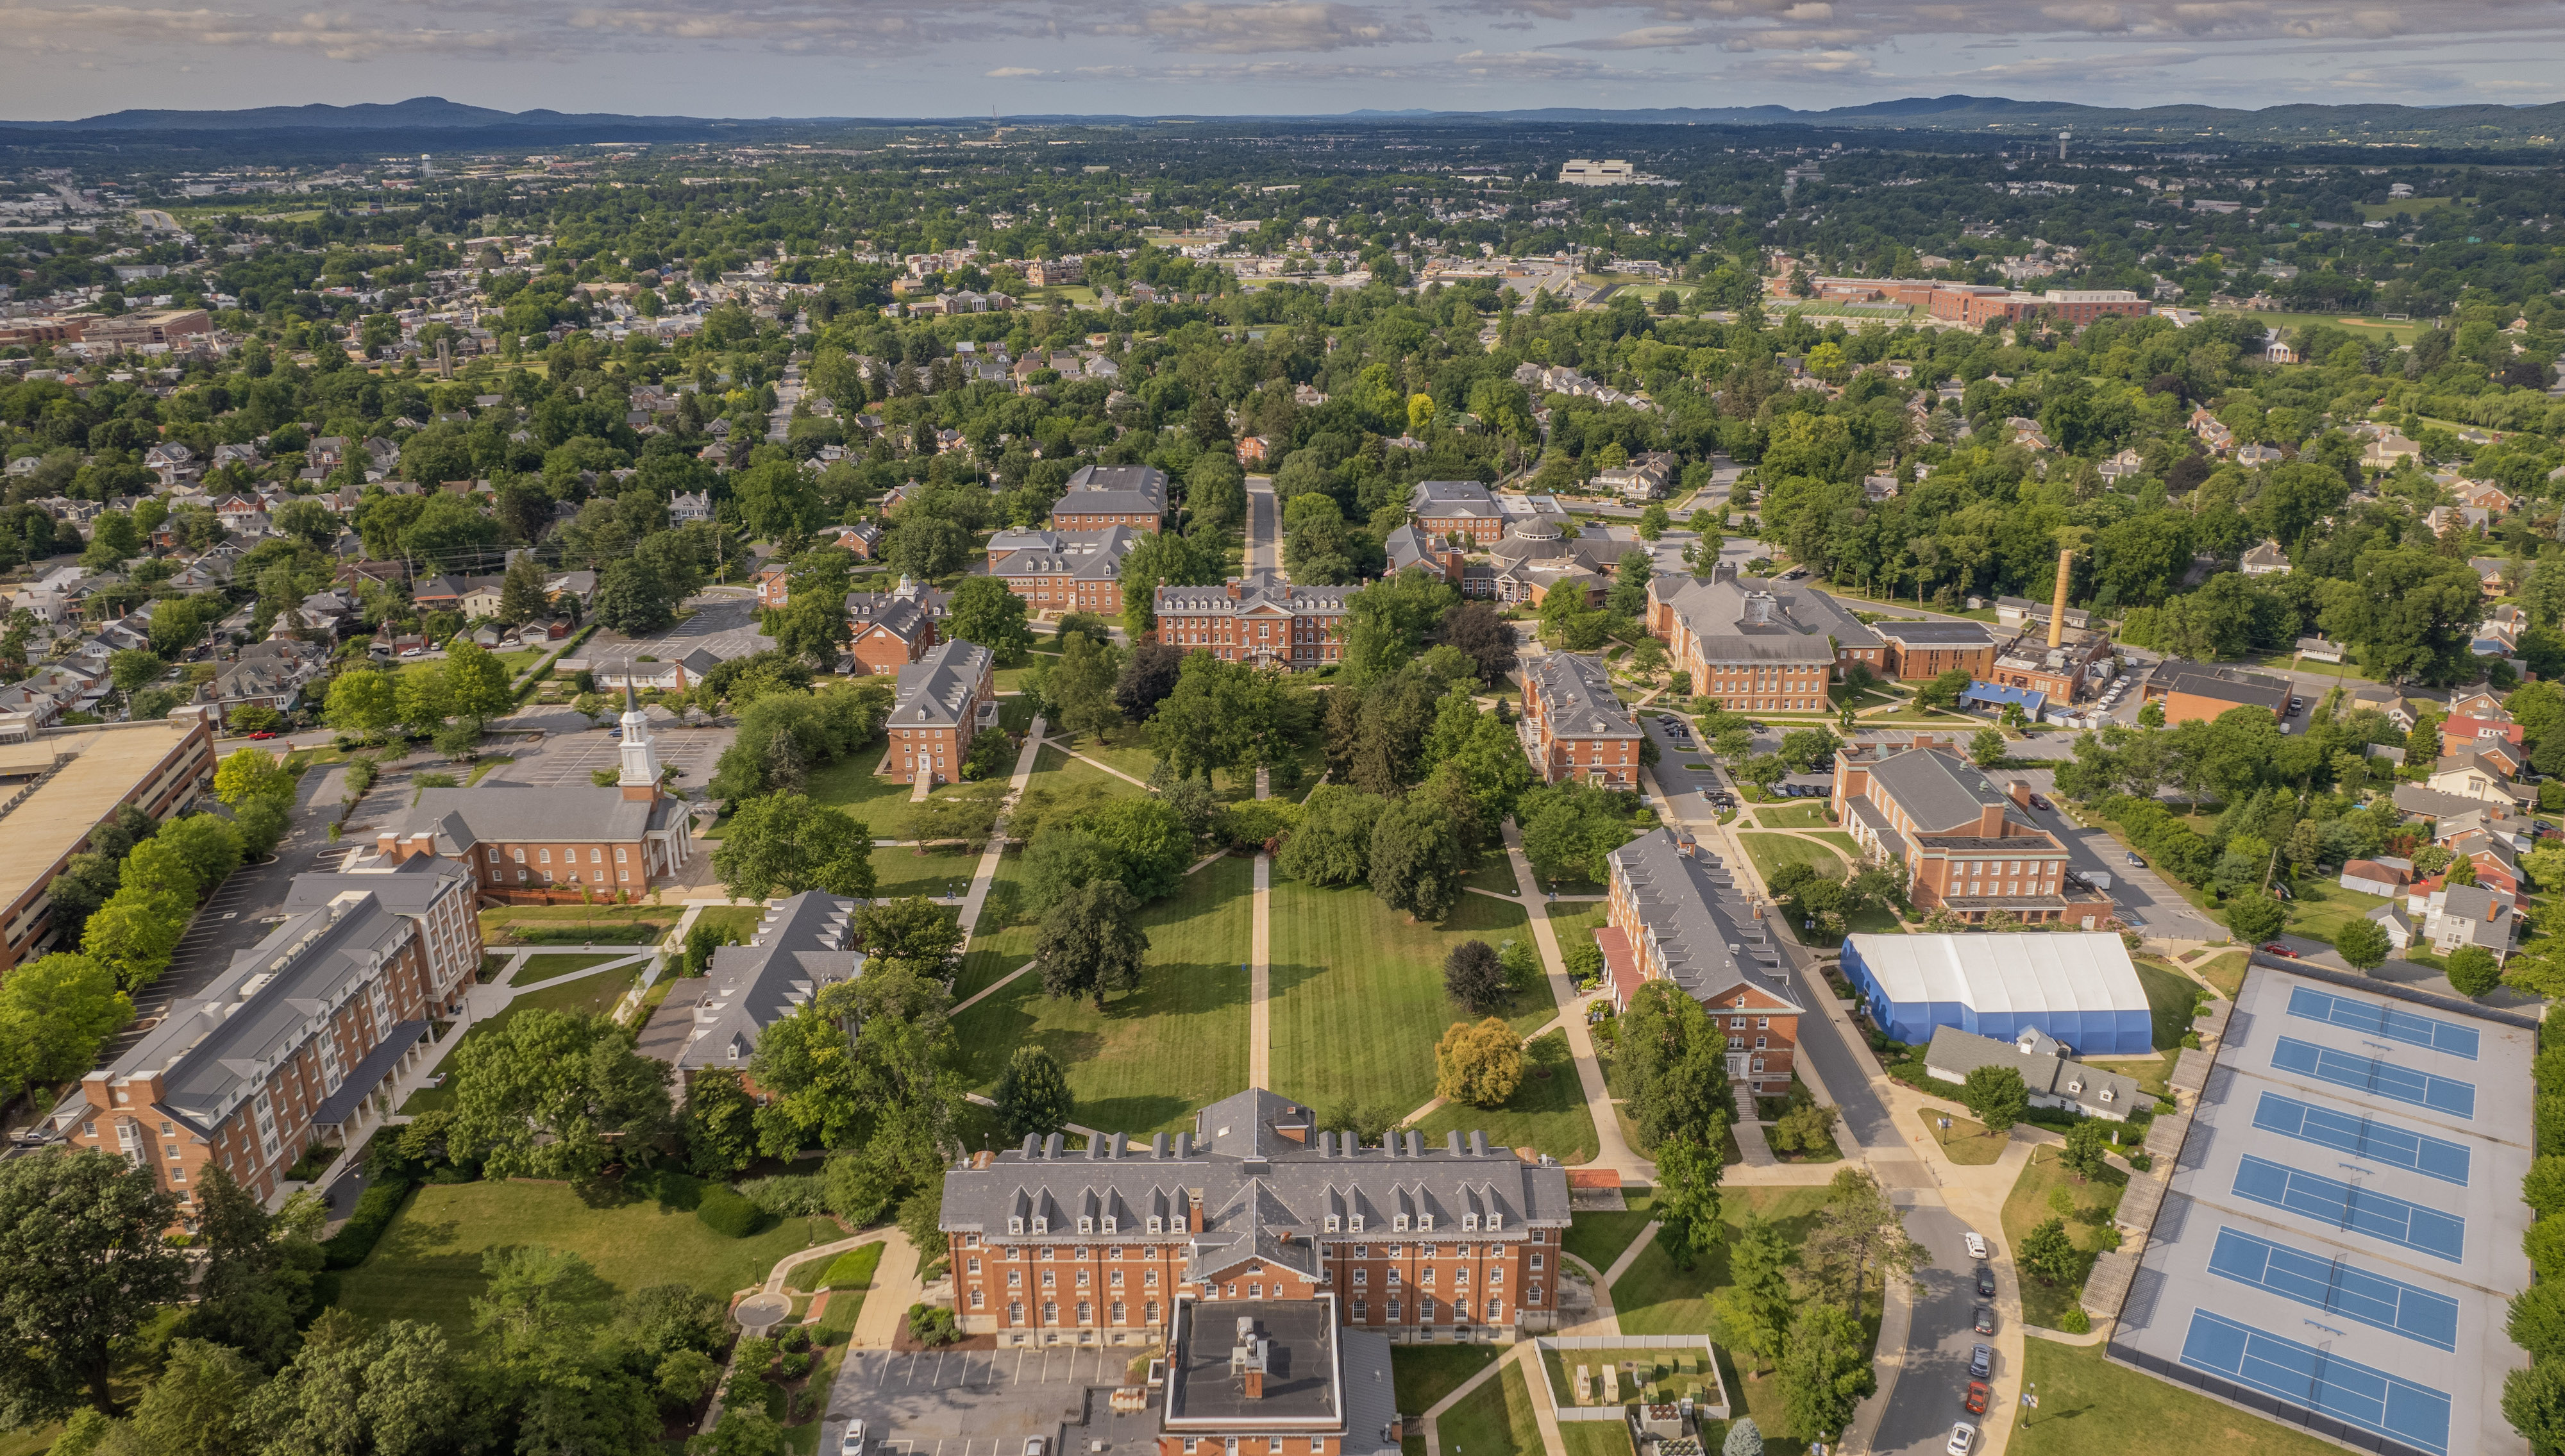 An aerial photograph of Hood College's campus taken during a sunny, summer day